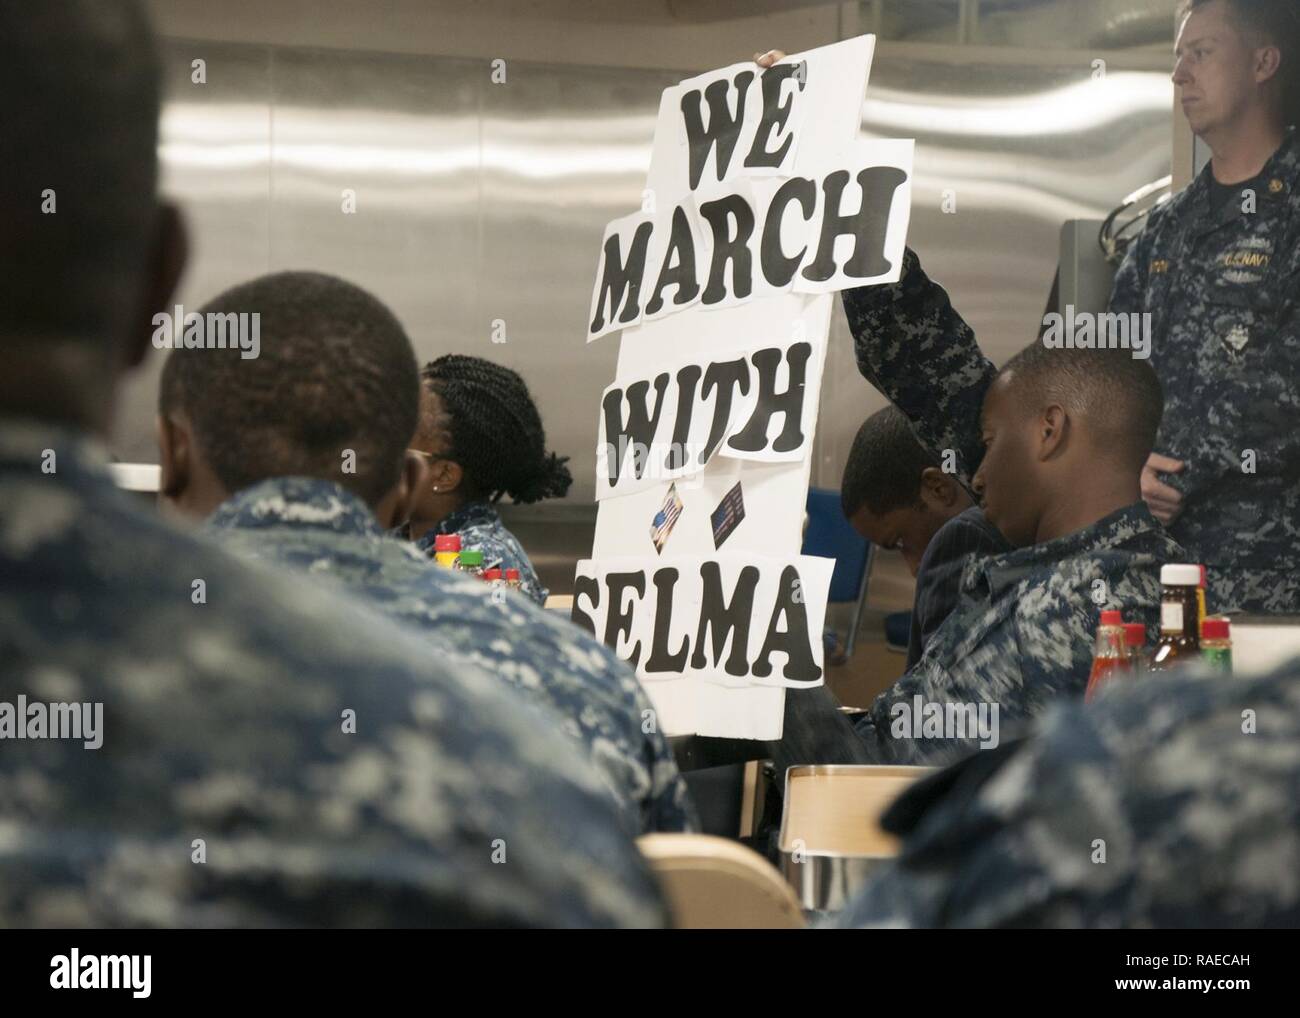 SANTA RITA, Guam (Jan. 31, 2017) Sailors assigned to the submarine tender USS Frank Cable (AS 40), attend a ceremony honoring Dr. Martin Luther King Jr. aboard the ship, Jan. 31. The ship’s diversity committee held the event to reenact the1965 Selma-to-Montgomery, Alabama March for voting rights led by Martin Luther King Jr.’s Southern Christian Leadership Conference. Frank Cable is one of two forward-deployed submarine tenders in the U.S. 7th Fleet area of operations and conducts maintenance and support of deployed U.S. naval force submarines and surface vessels in the Indo-Asia-Pacific regio Stock Photo